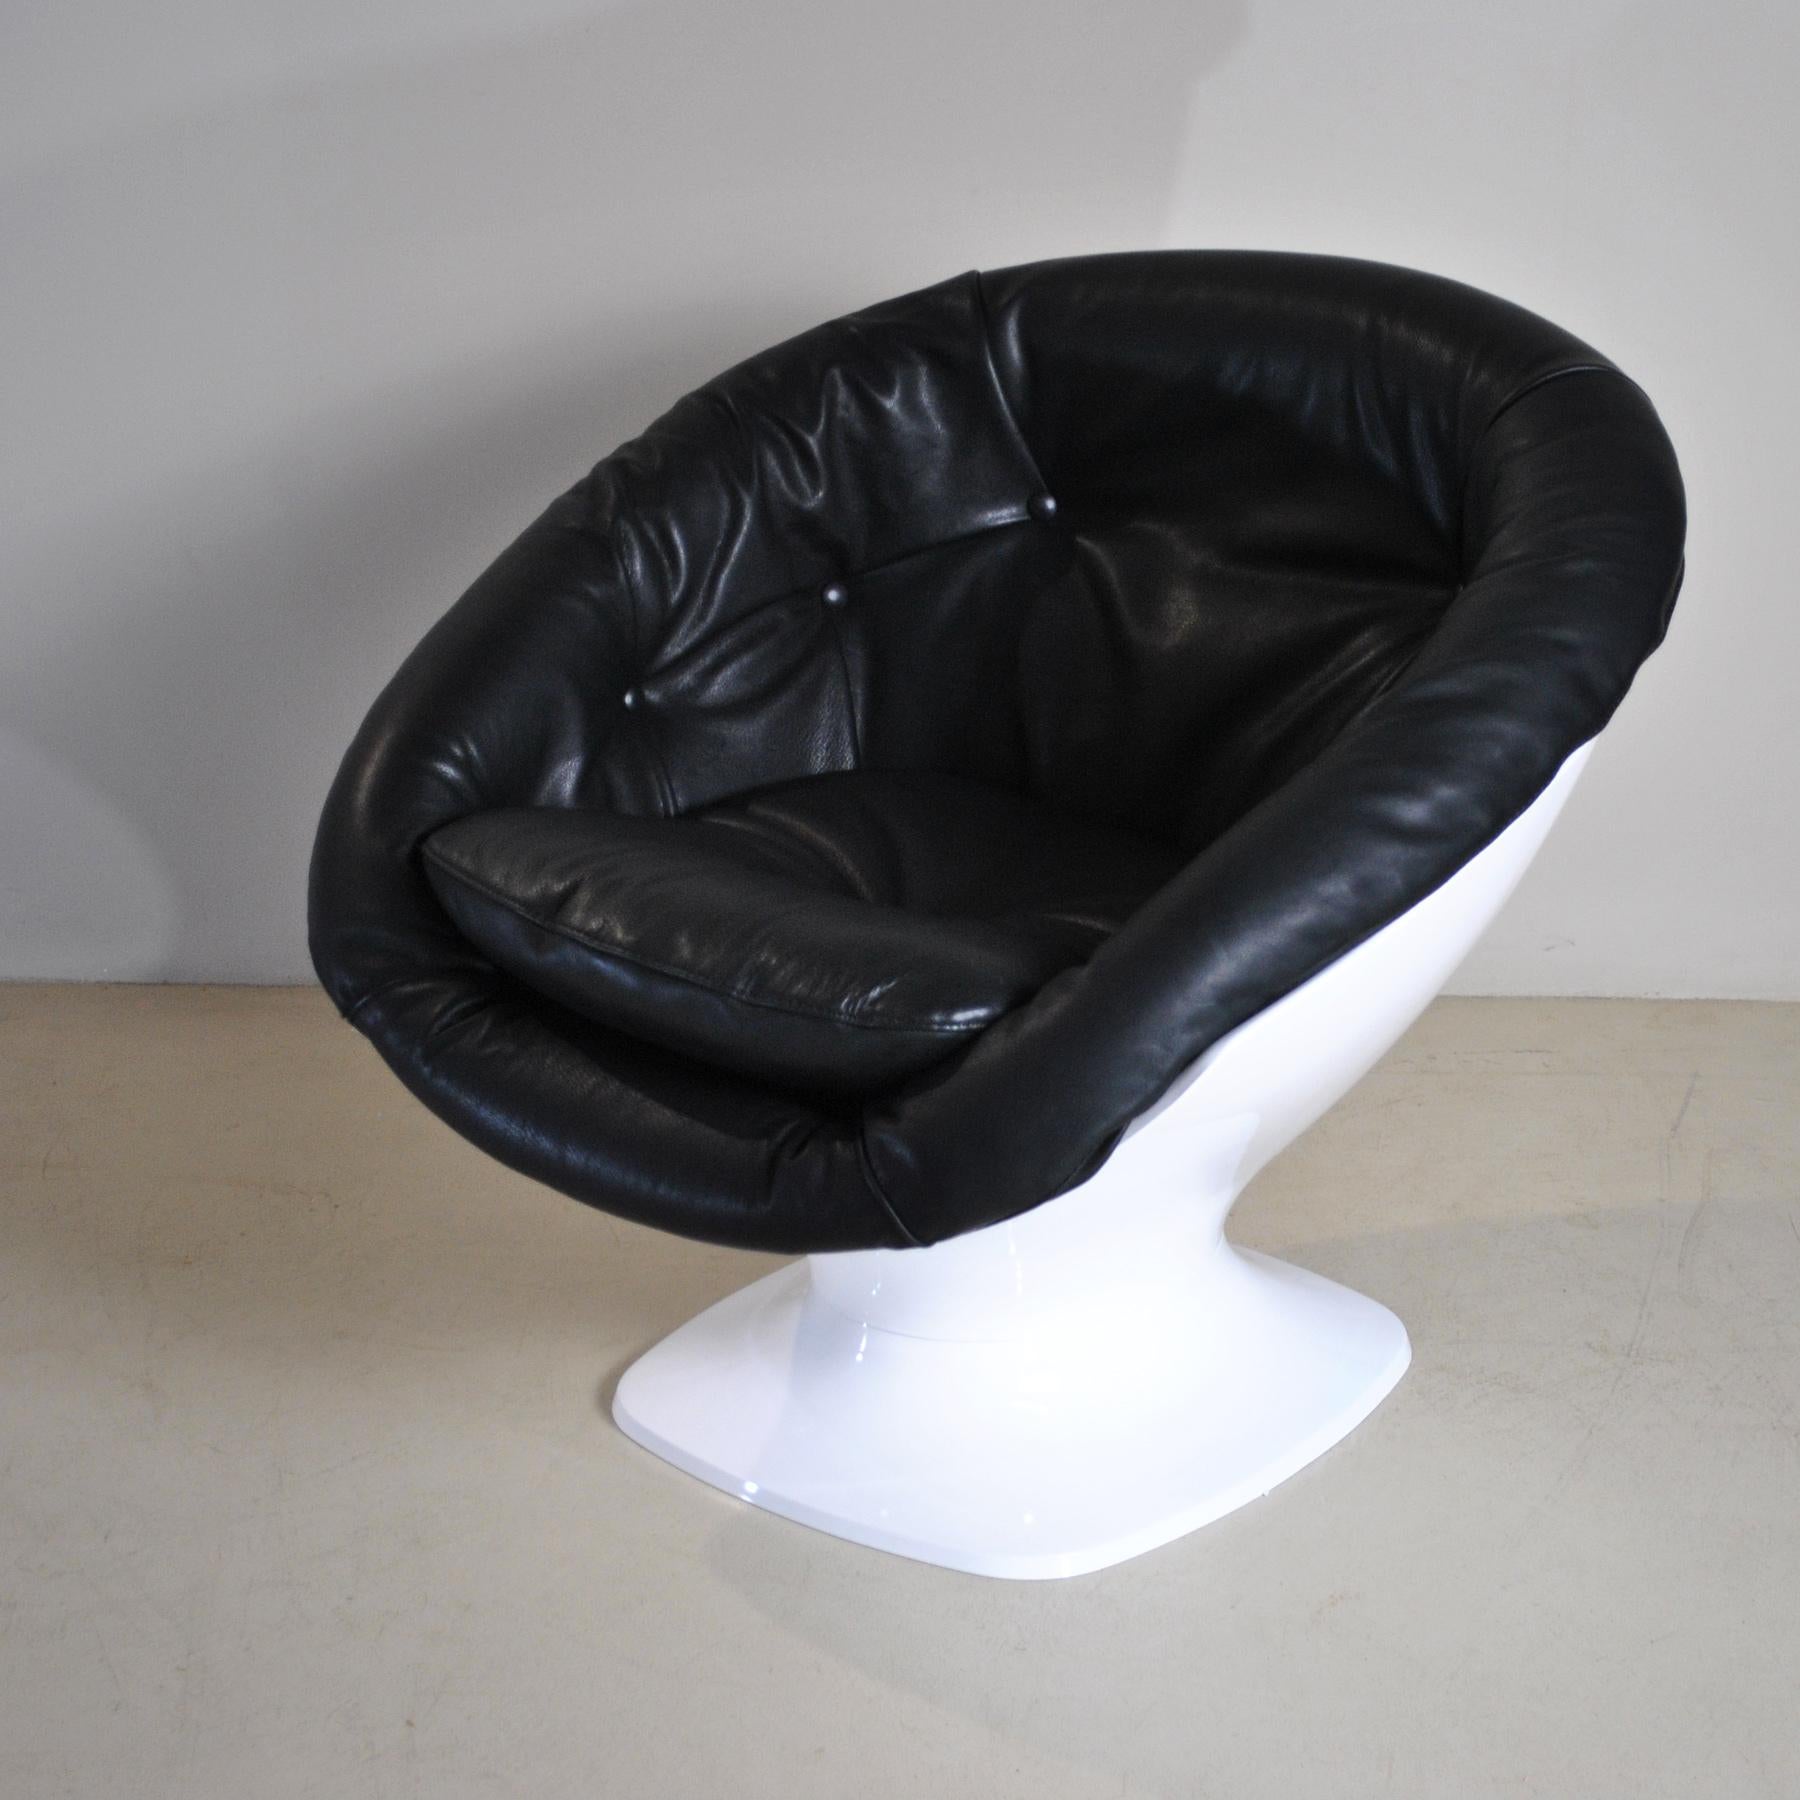 Plastic club chair designed by Raphael Raffel produced in France in the 70s in tulip style with rounded seat, covered with black leather.